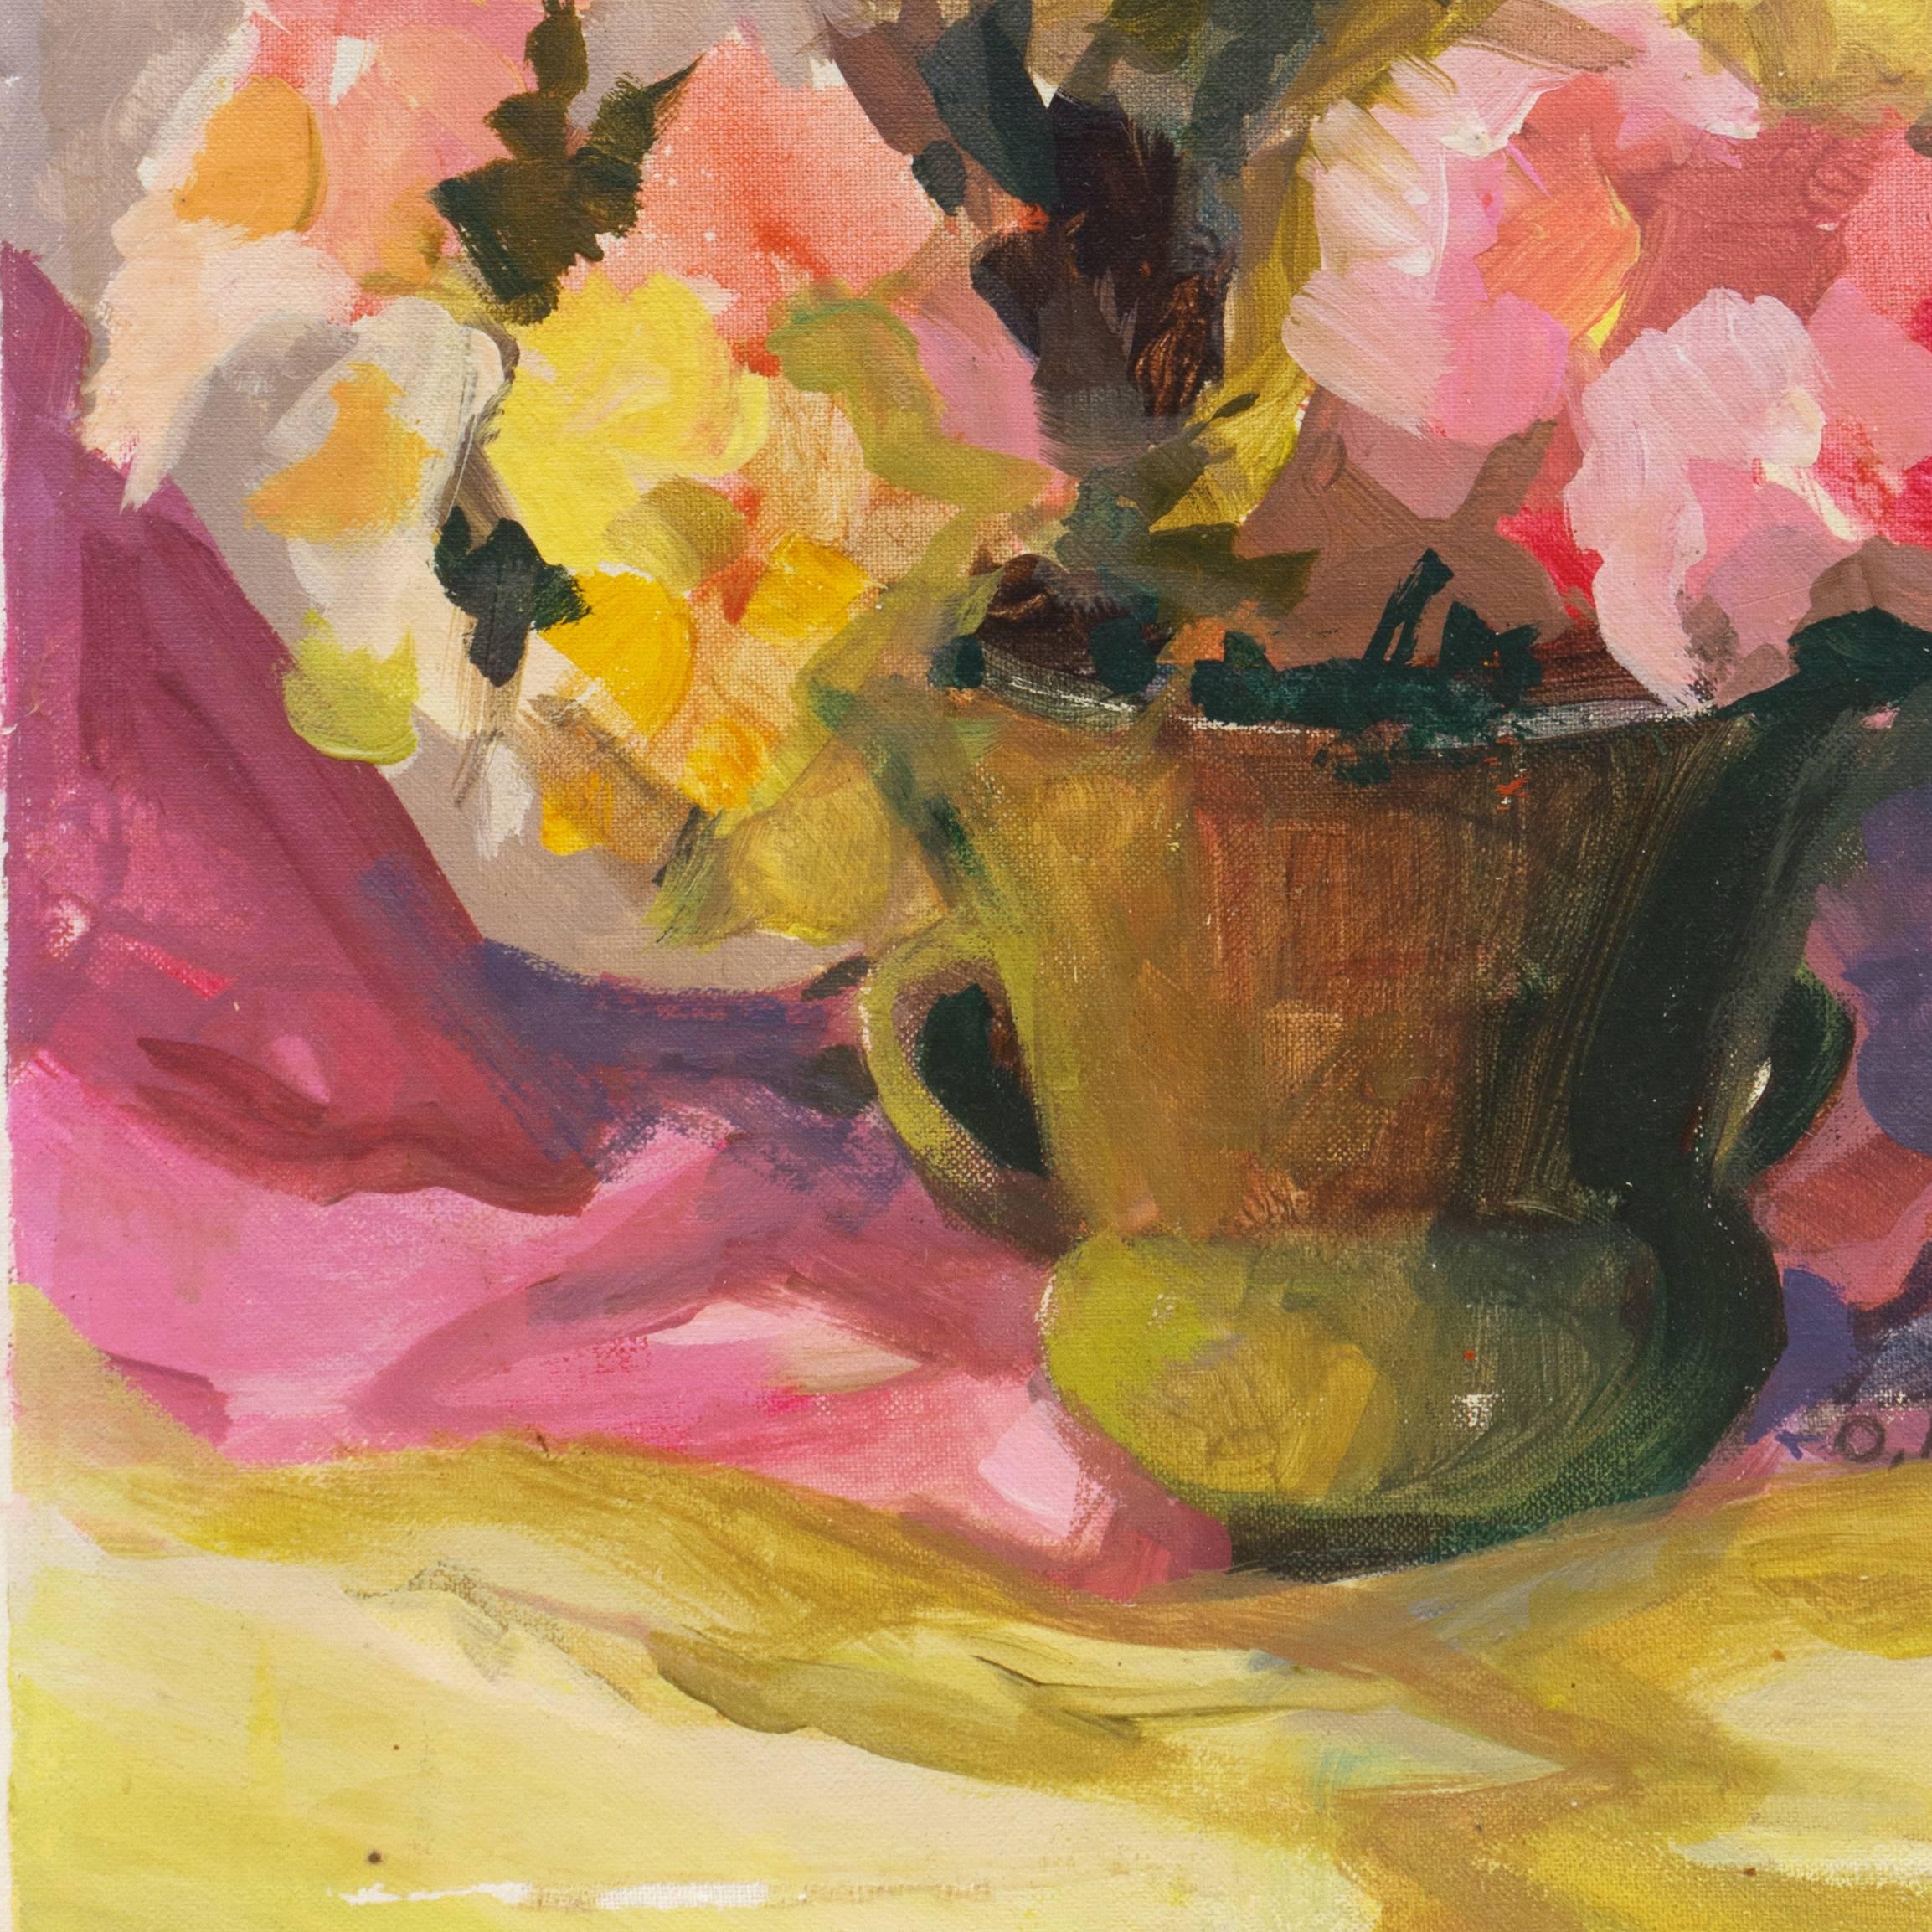 A period oil study showing a bouquet of pastel pink and yellow dog roses informally arranged in a jade colored vase and contrasted against magenta drapery.

Signed lower right, 'O. Miller' and painted circa 1965.

